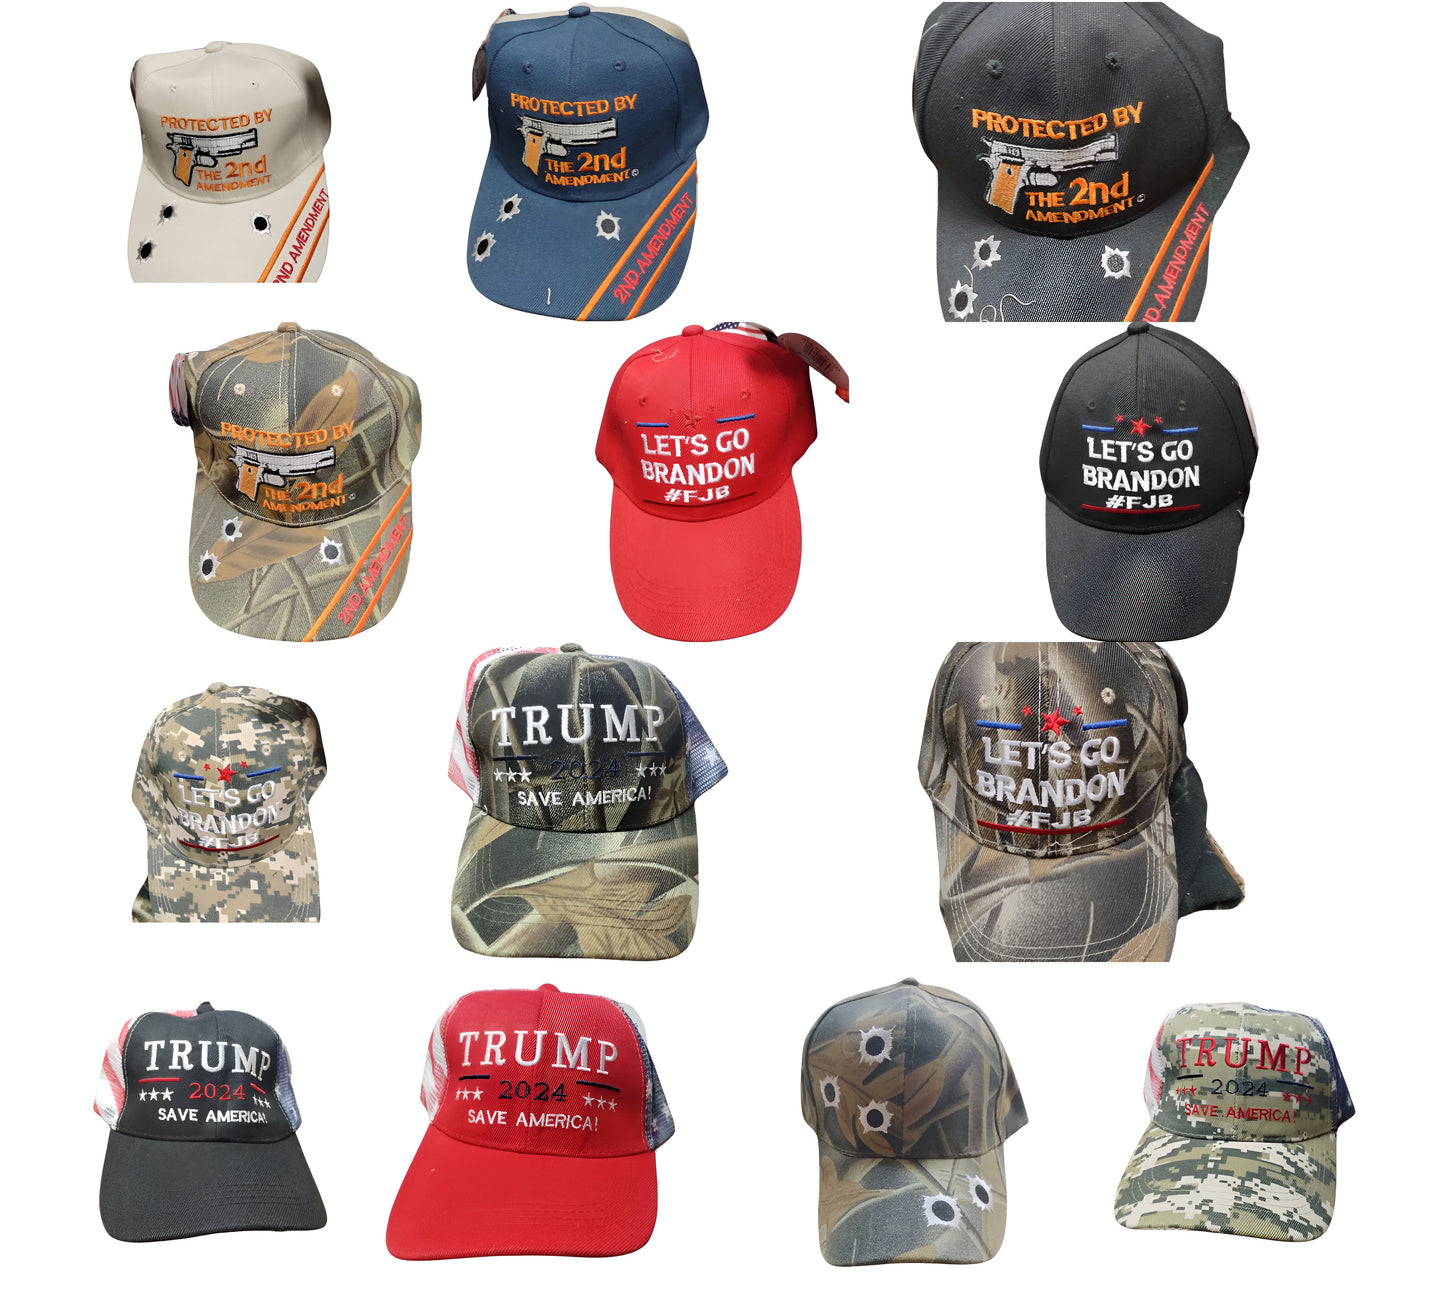 Assorted Patriot/Conservative Design Caps | Wear Your Values with Style